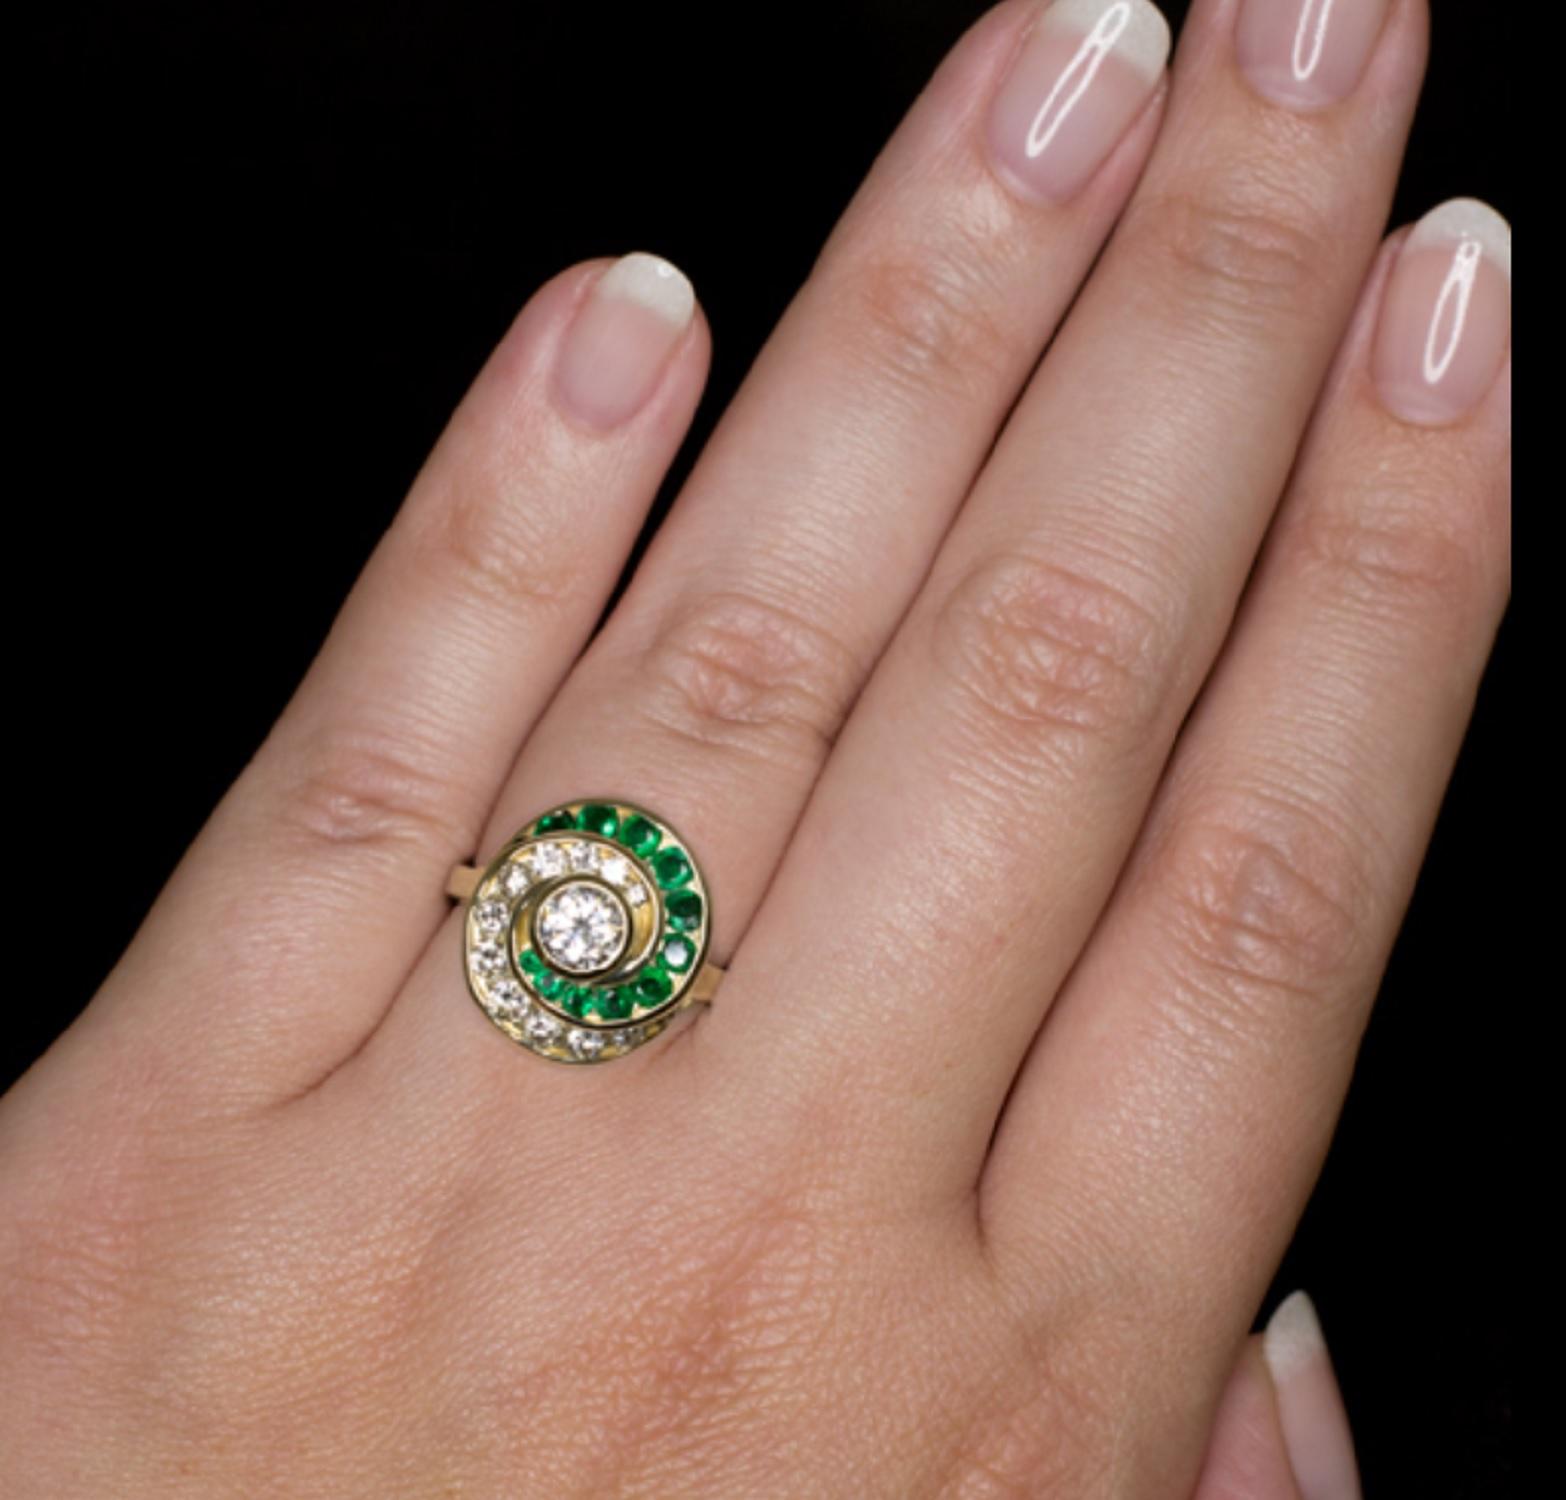 Authentic Vintage Round Brilliant Cut Diamond Natural Emerald Cocktail Ring 
main stone approx weight is 0.50 carats is 100% eye clean and white
side diamonds also very clear and great color natural emeralds 
all set in 14 carats yellow gold